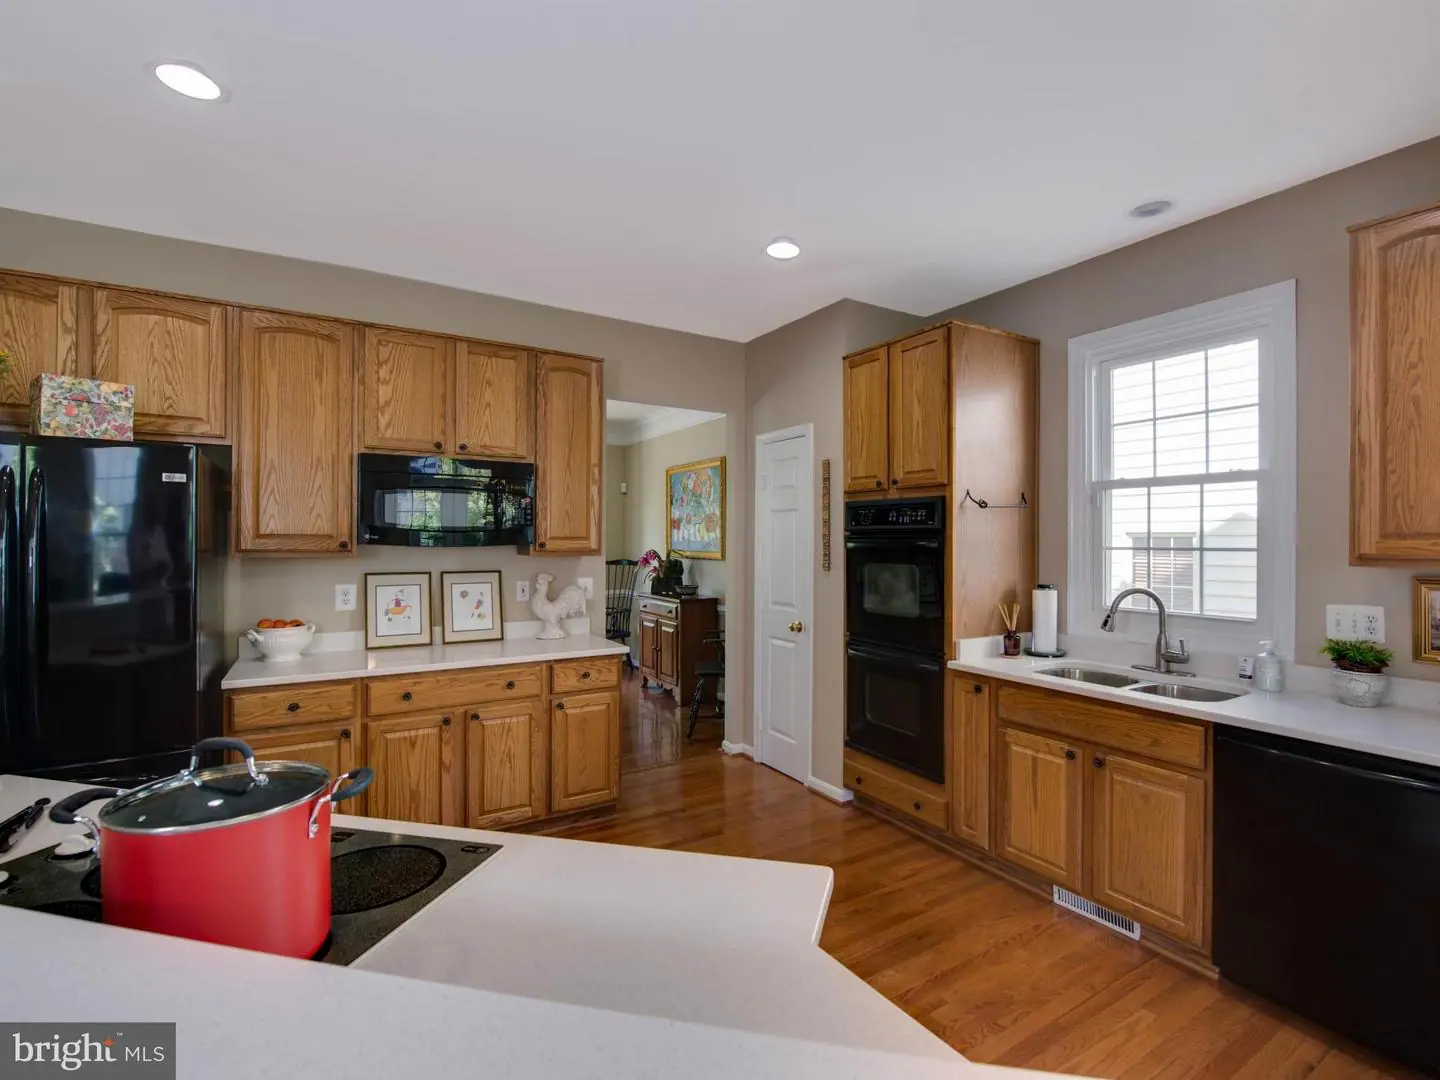 1002166507-121242701319-2021-09-05-22-36-59  |  Windy Hill At Lincolnia | Alexandria Delaware Real Estate For Sale | MLS# 1002166507  - Best of Northern Virginia